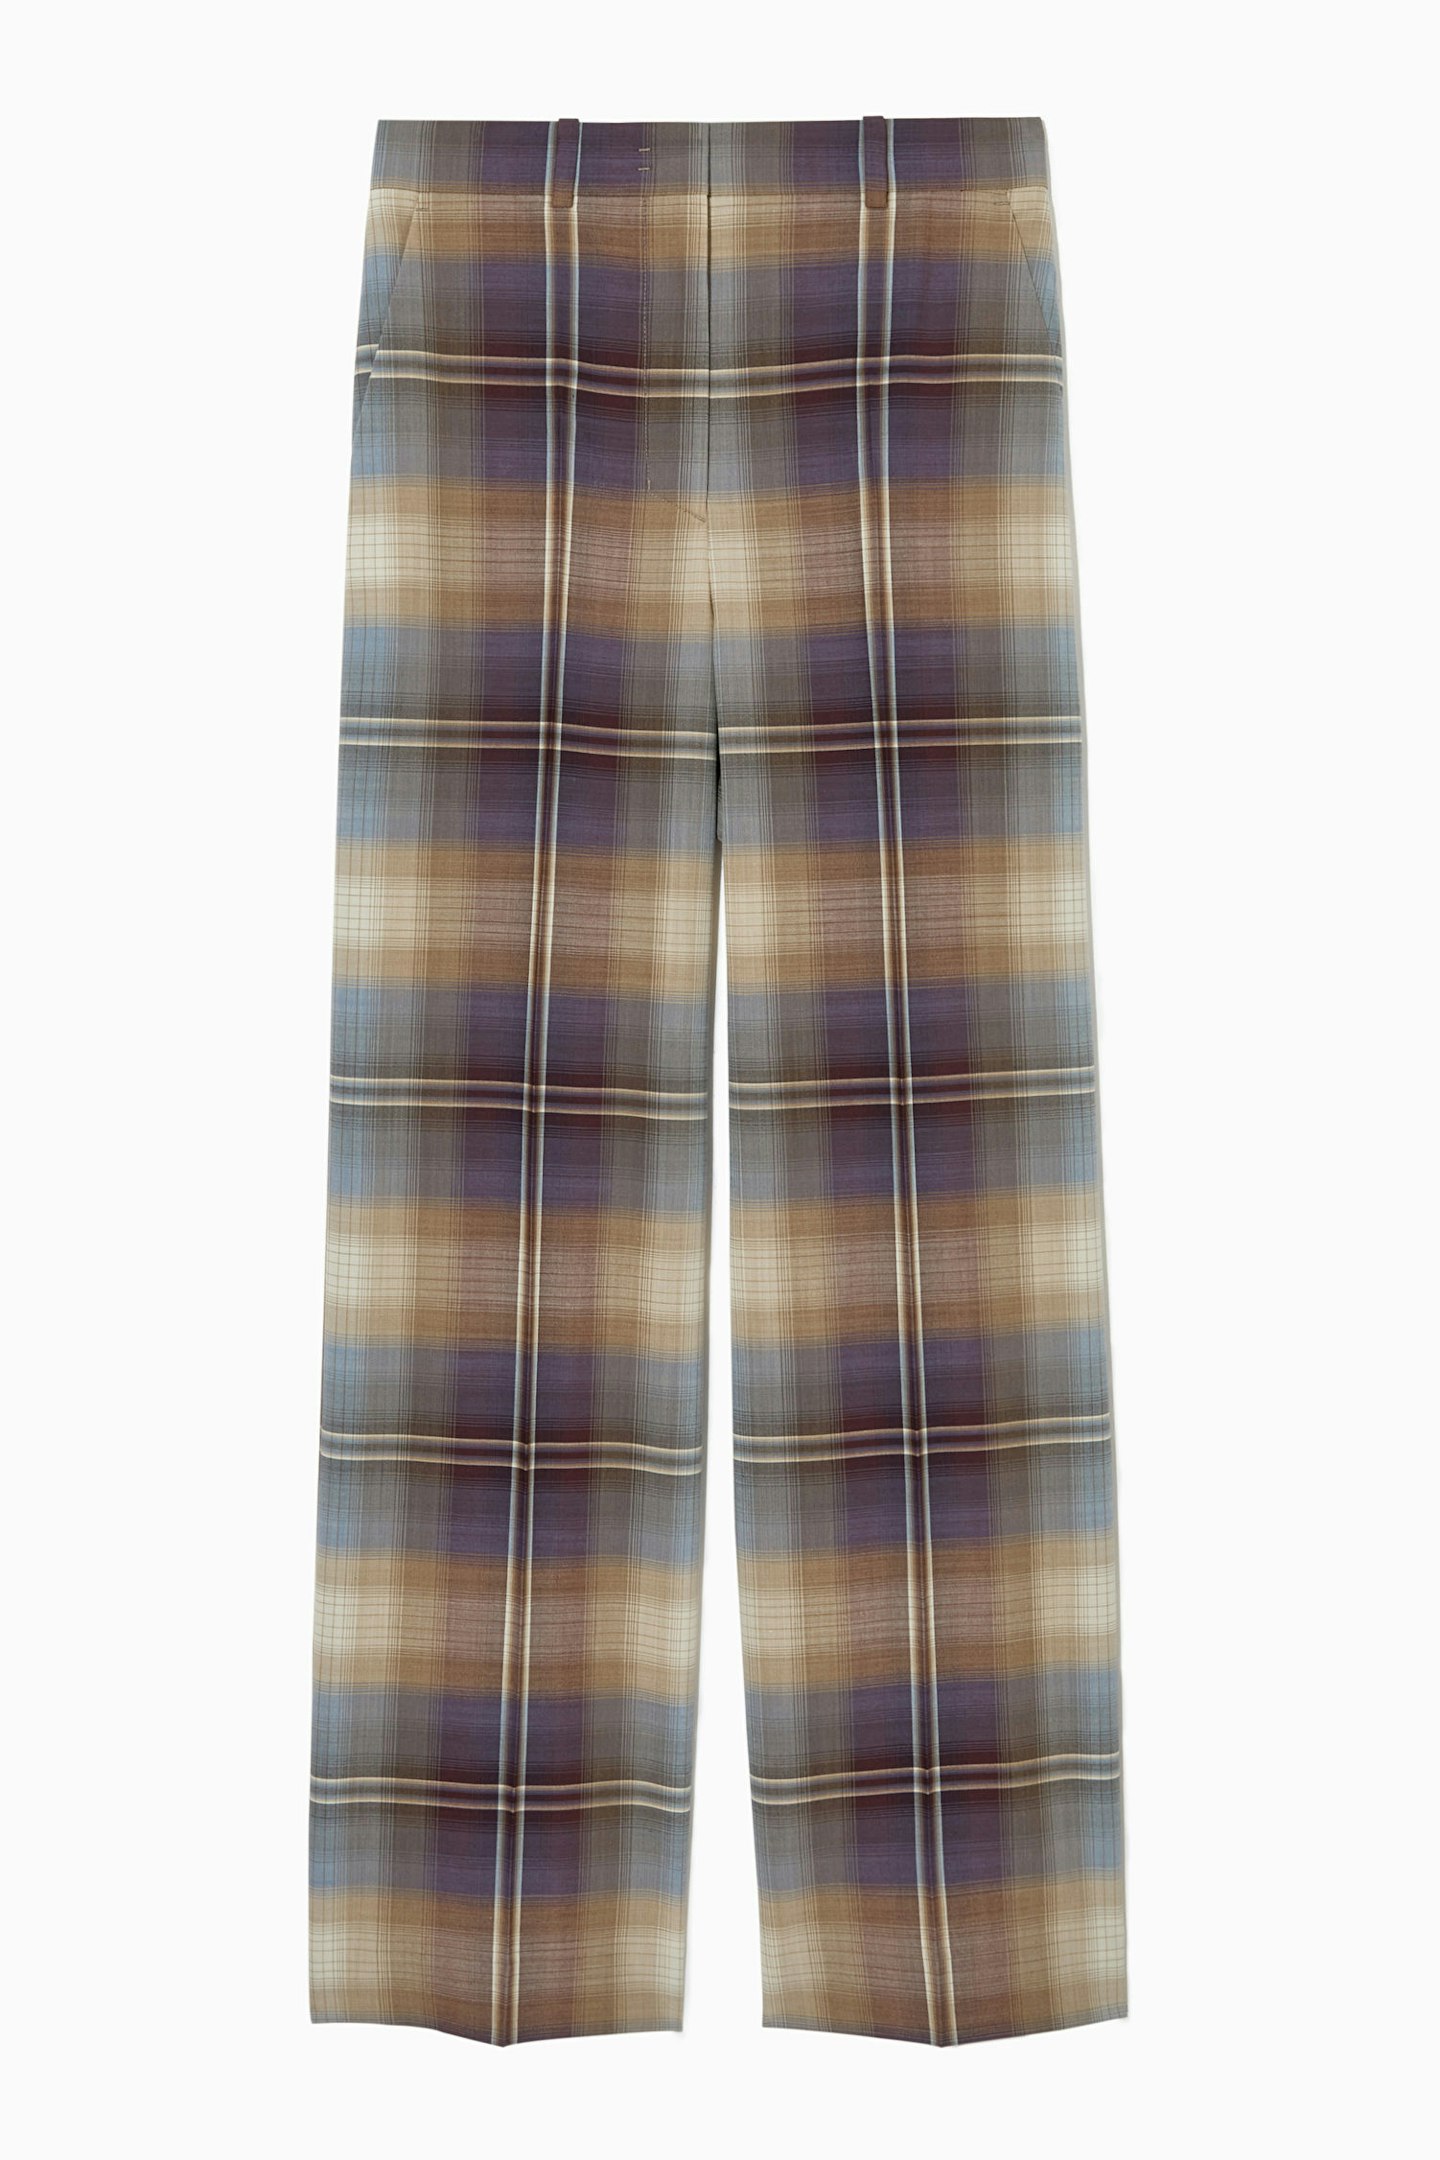 COS, Wide-Leg Checked Wool-Blend Trousers